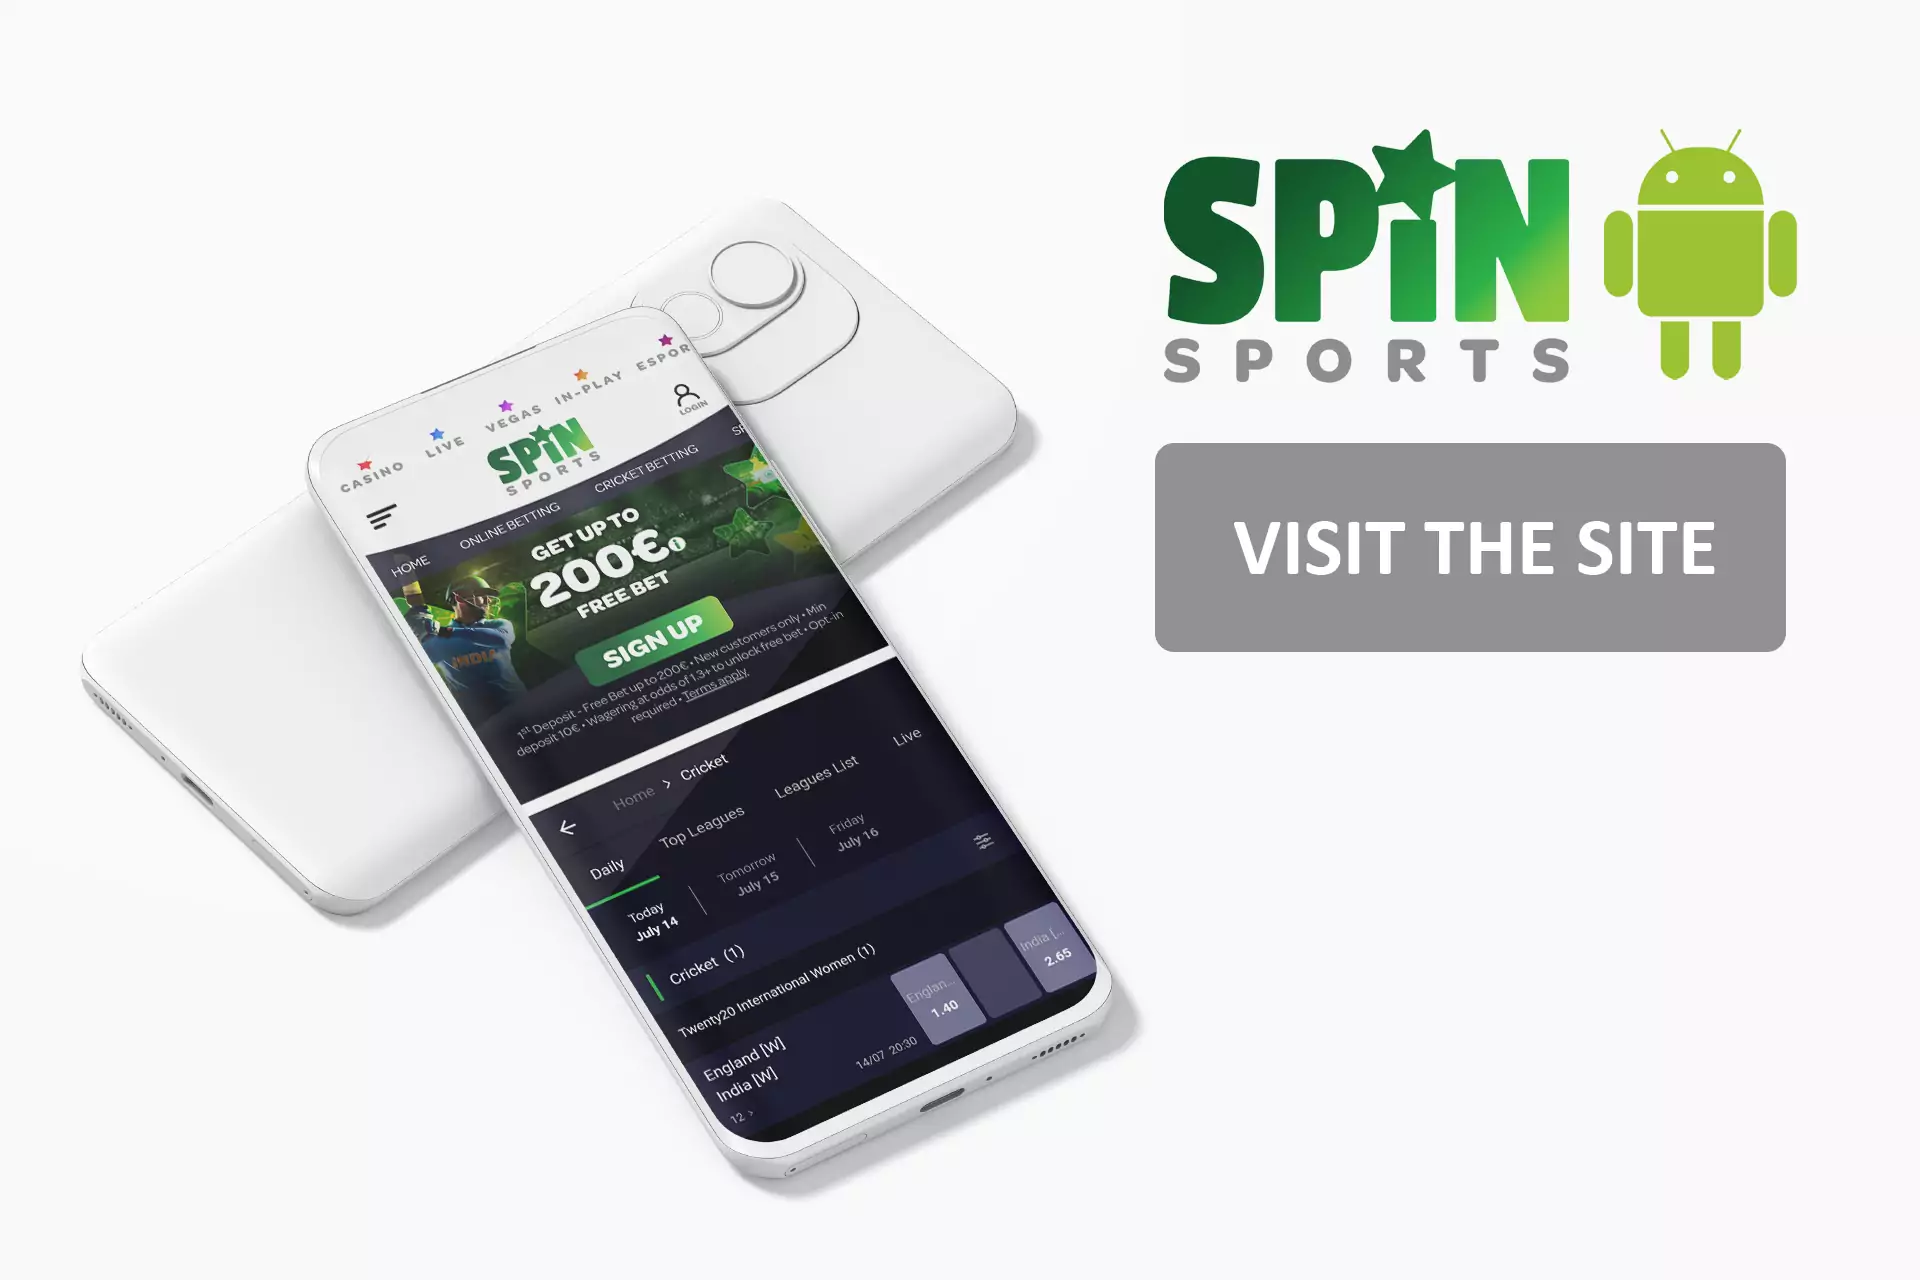 Open the homepage of Spin Sports and find the link to download the mobile app.